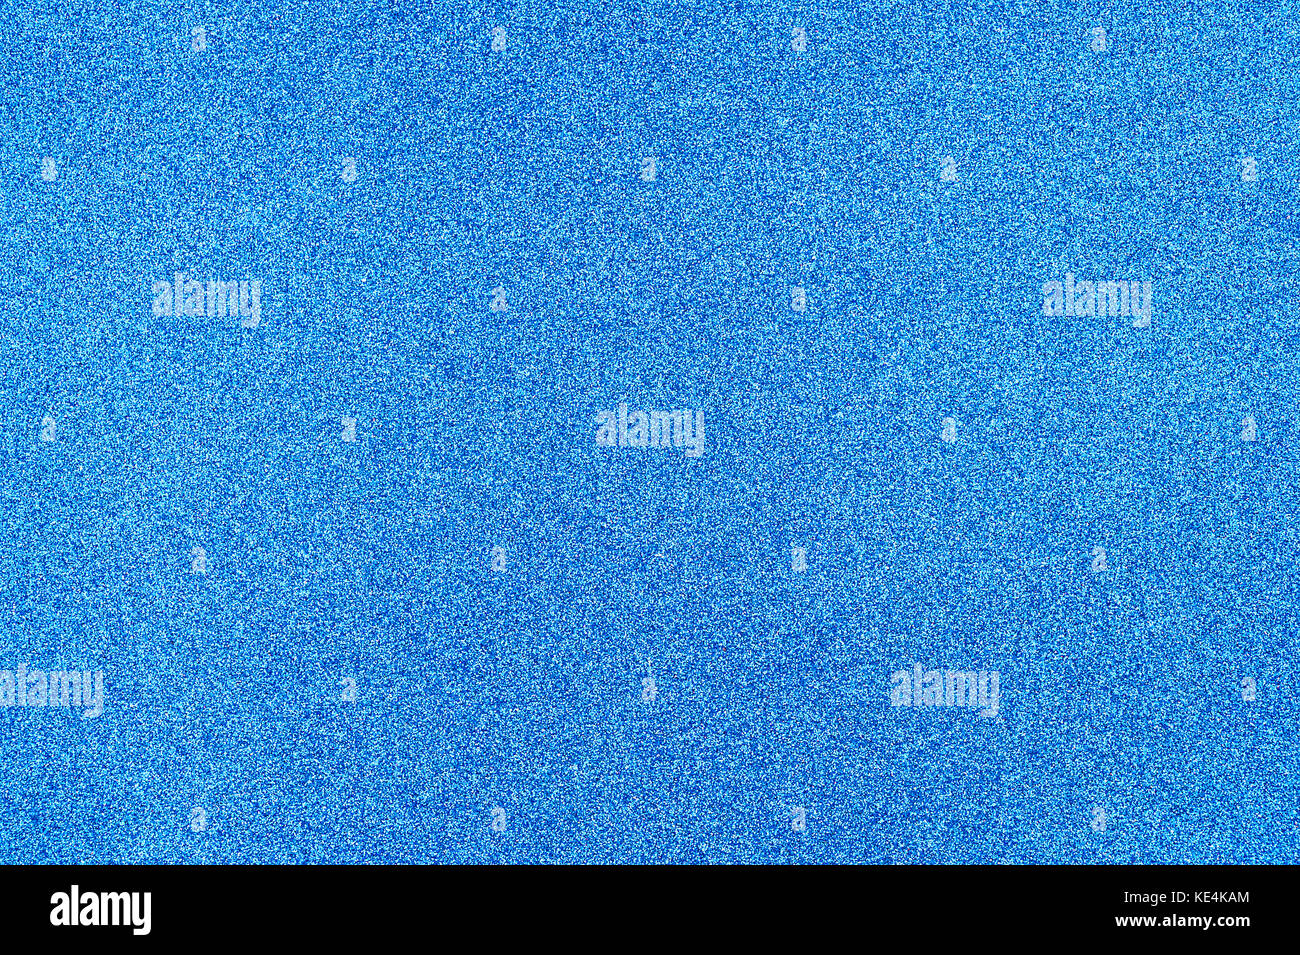 Texture glitter paper blue color background Stock Photo